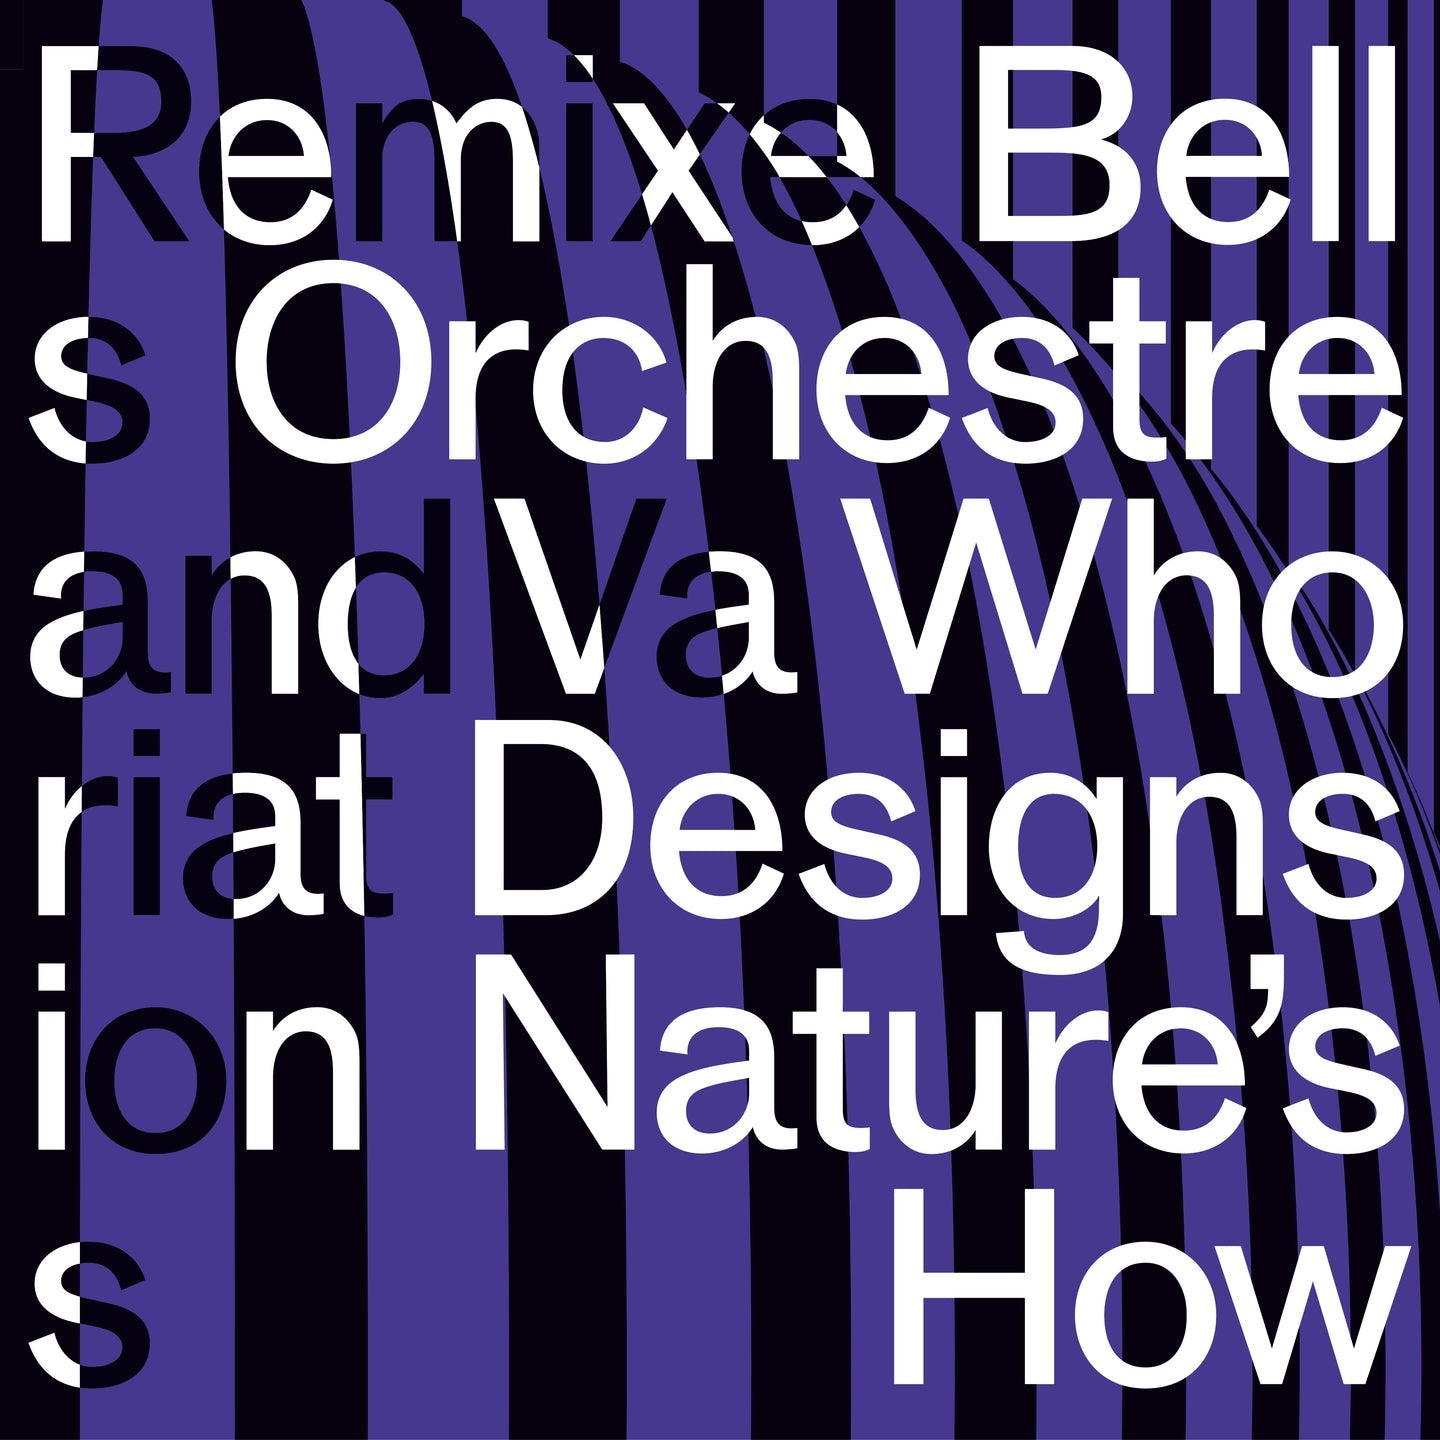 Arcade Sound - Bell Orchestre - Who Designs Natures How? front cover